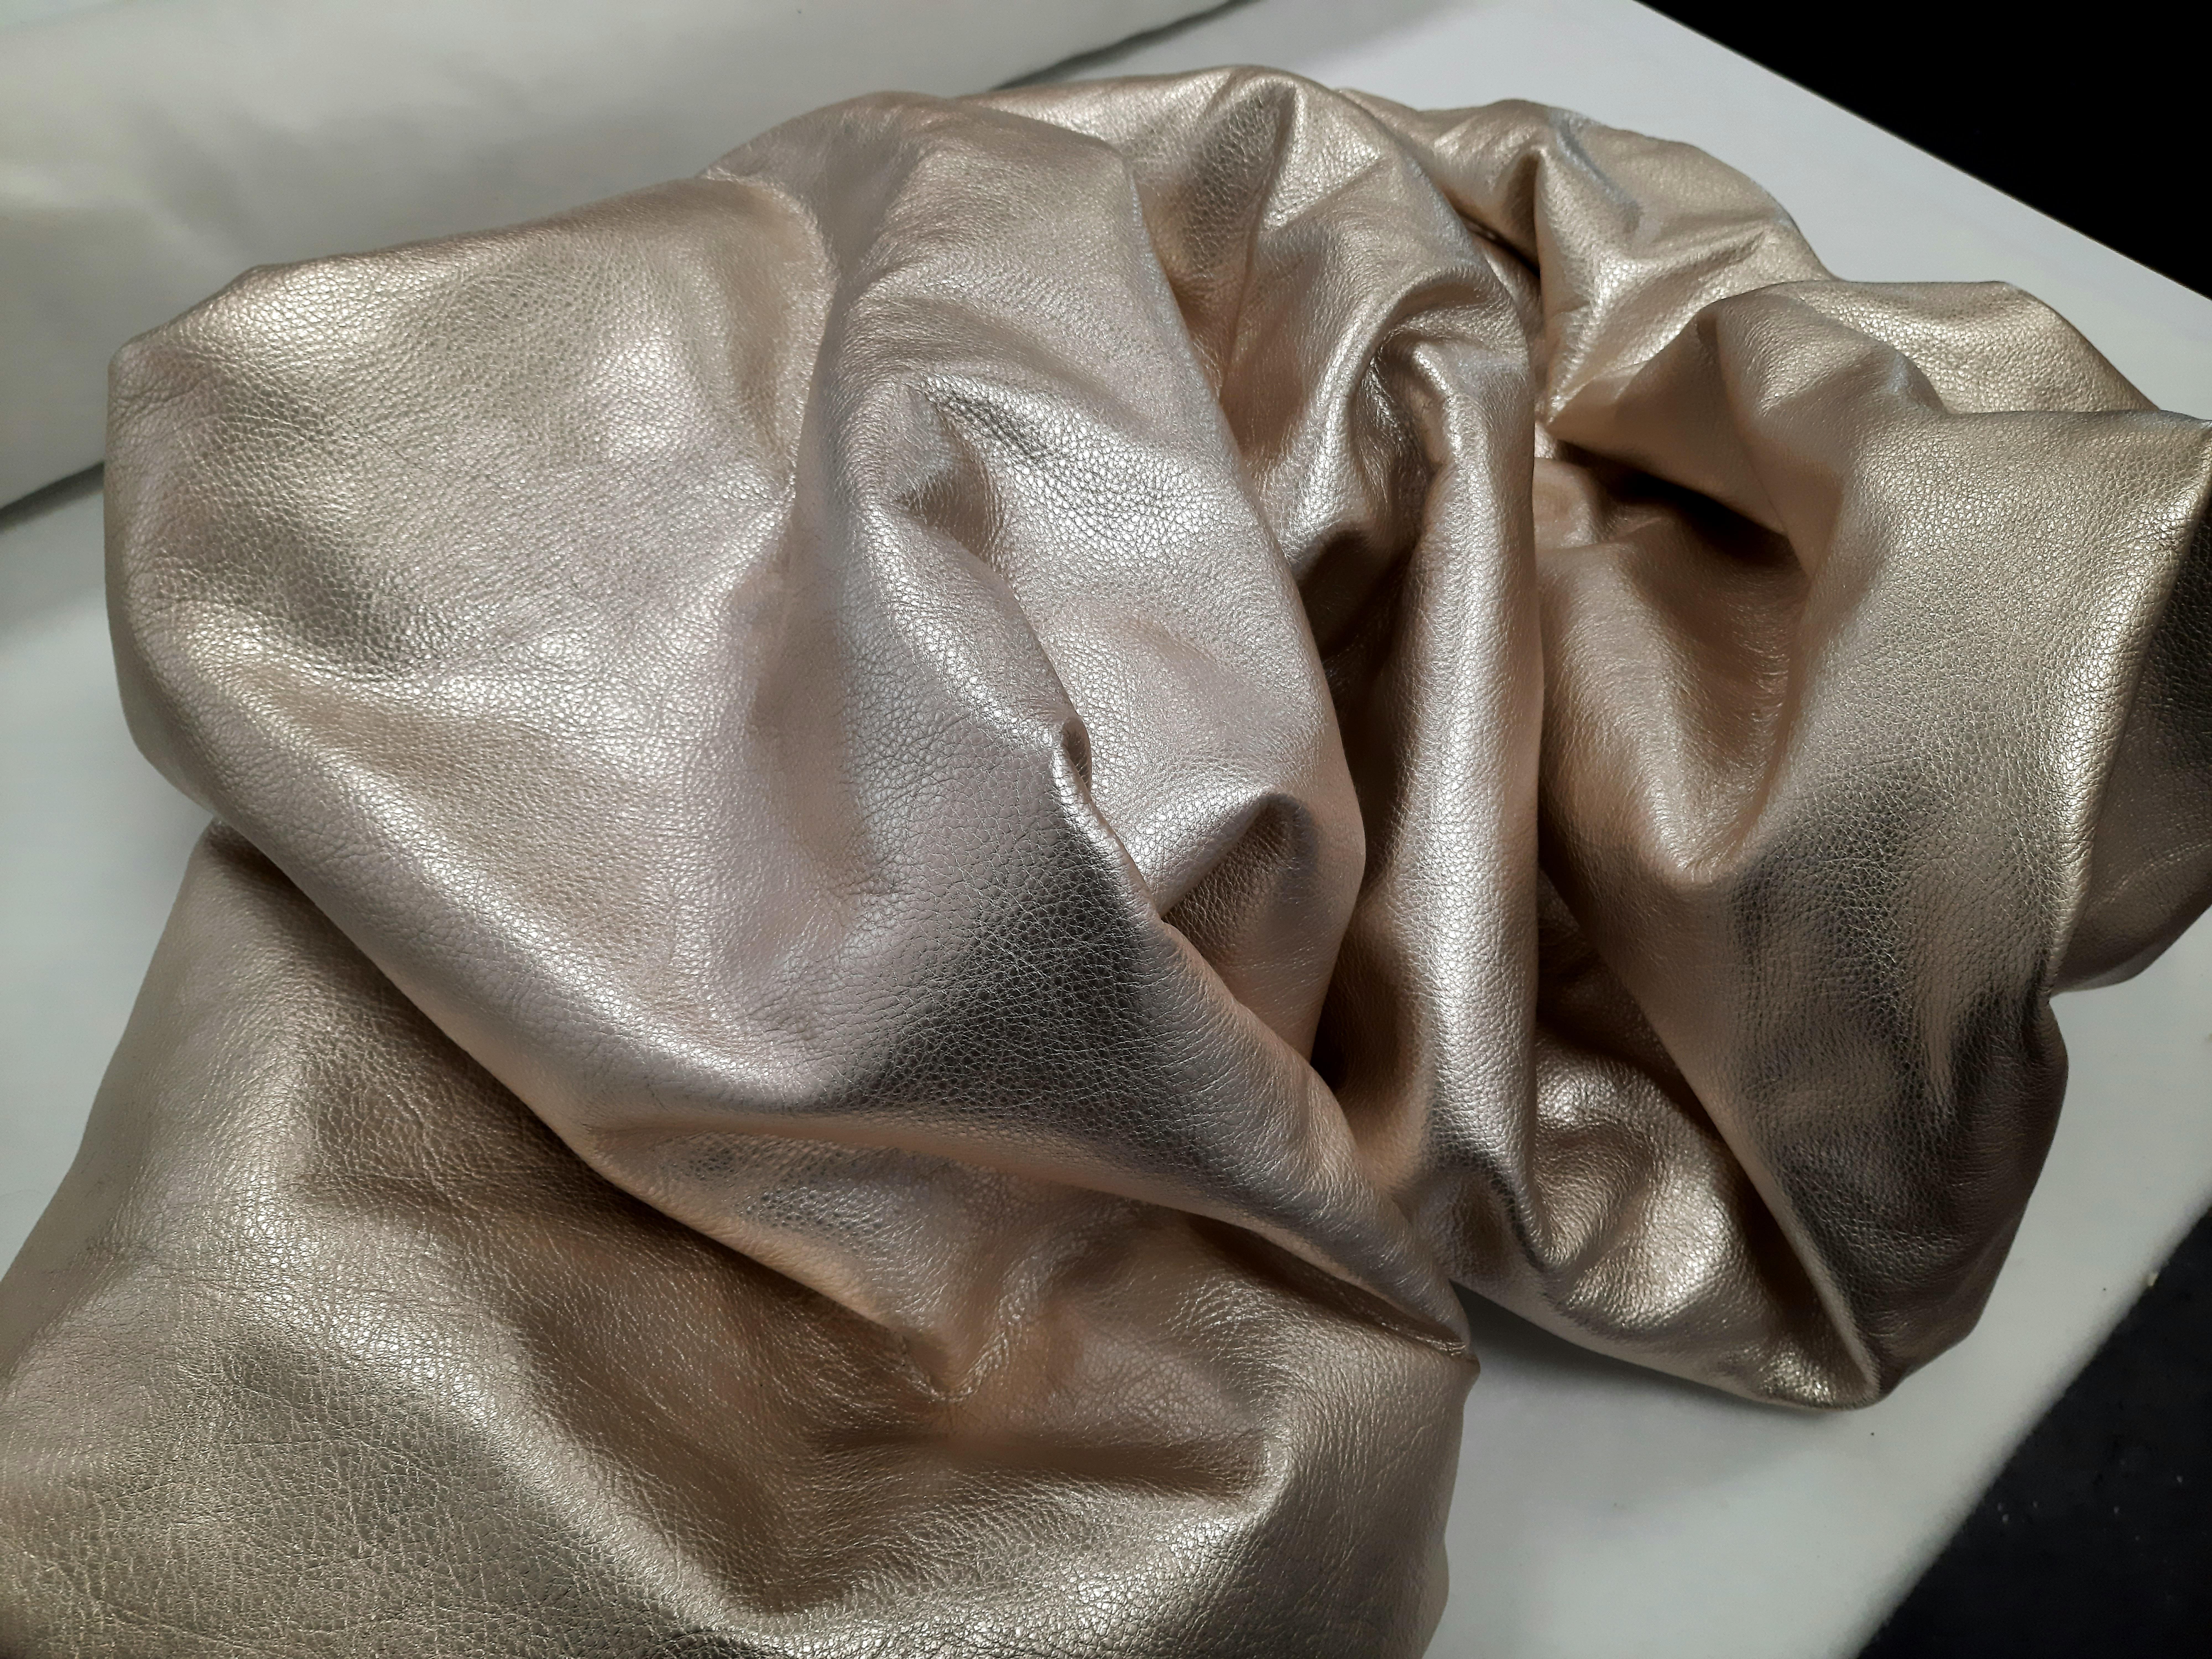 Drape Champagne 114 (folds pop slick metallic smooth leather wall sculpture art) - Sculpture by Ted VanCleave